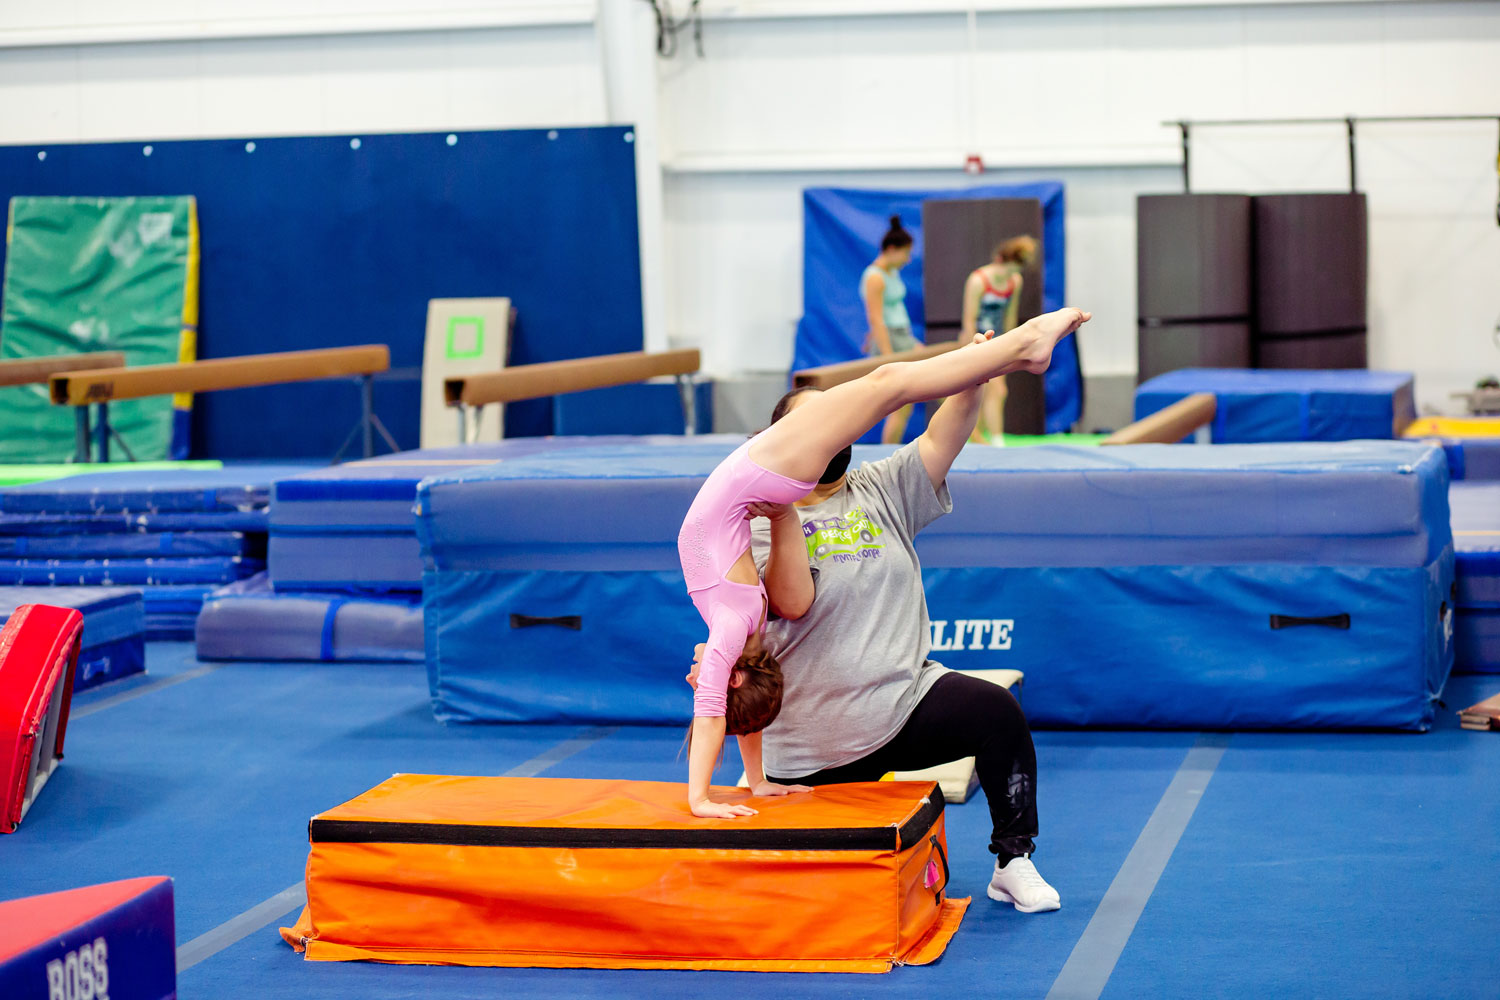 Difference Between Tumbling & Gymnastics